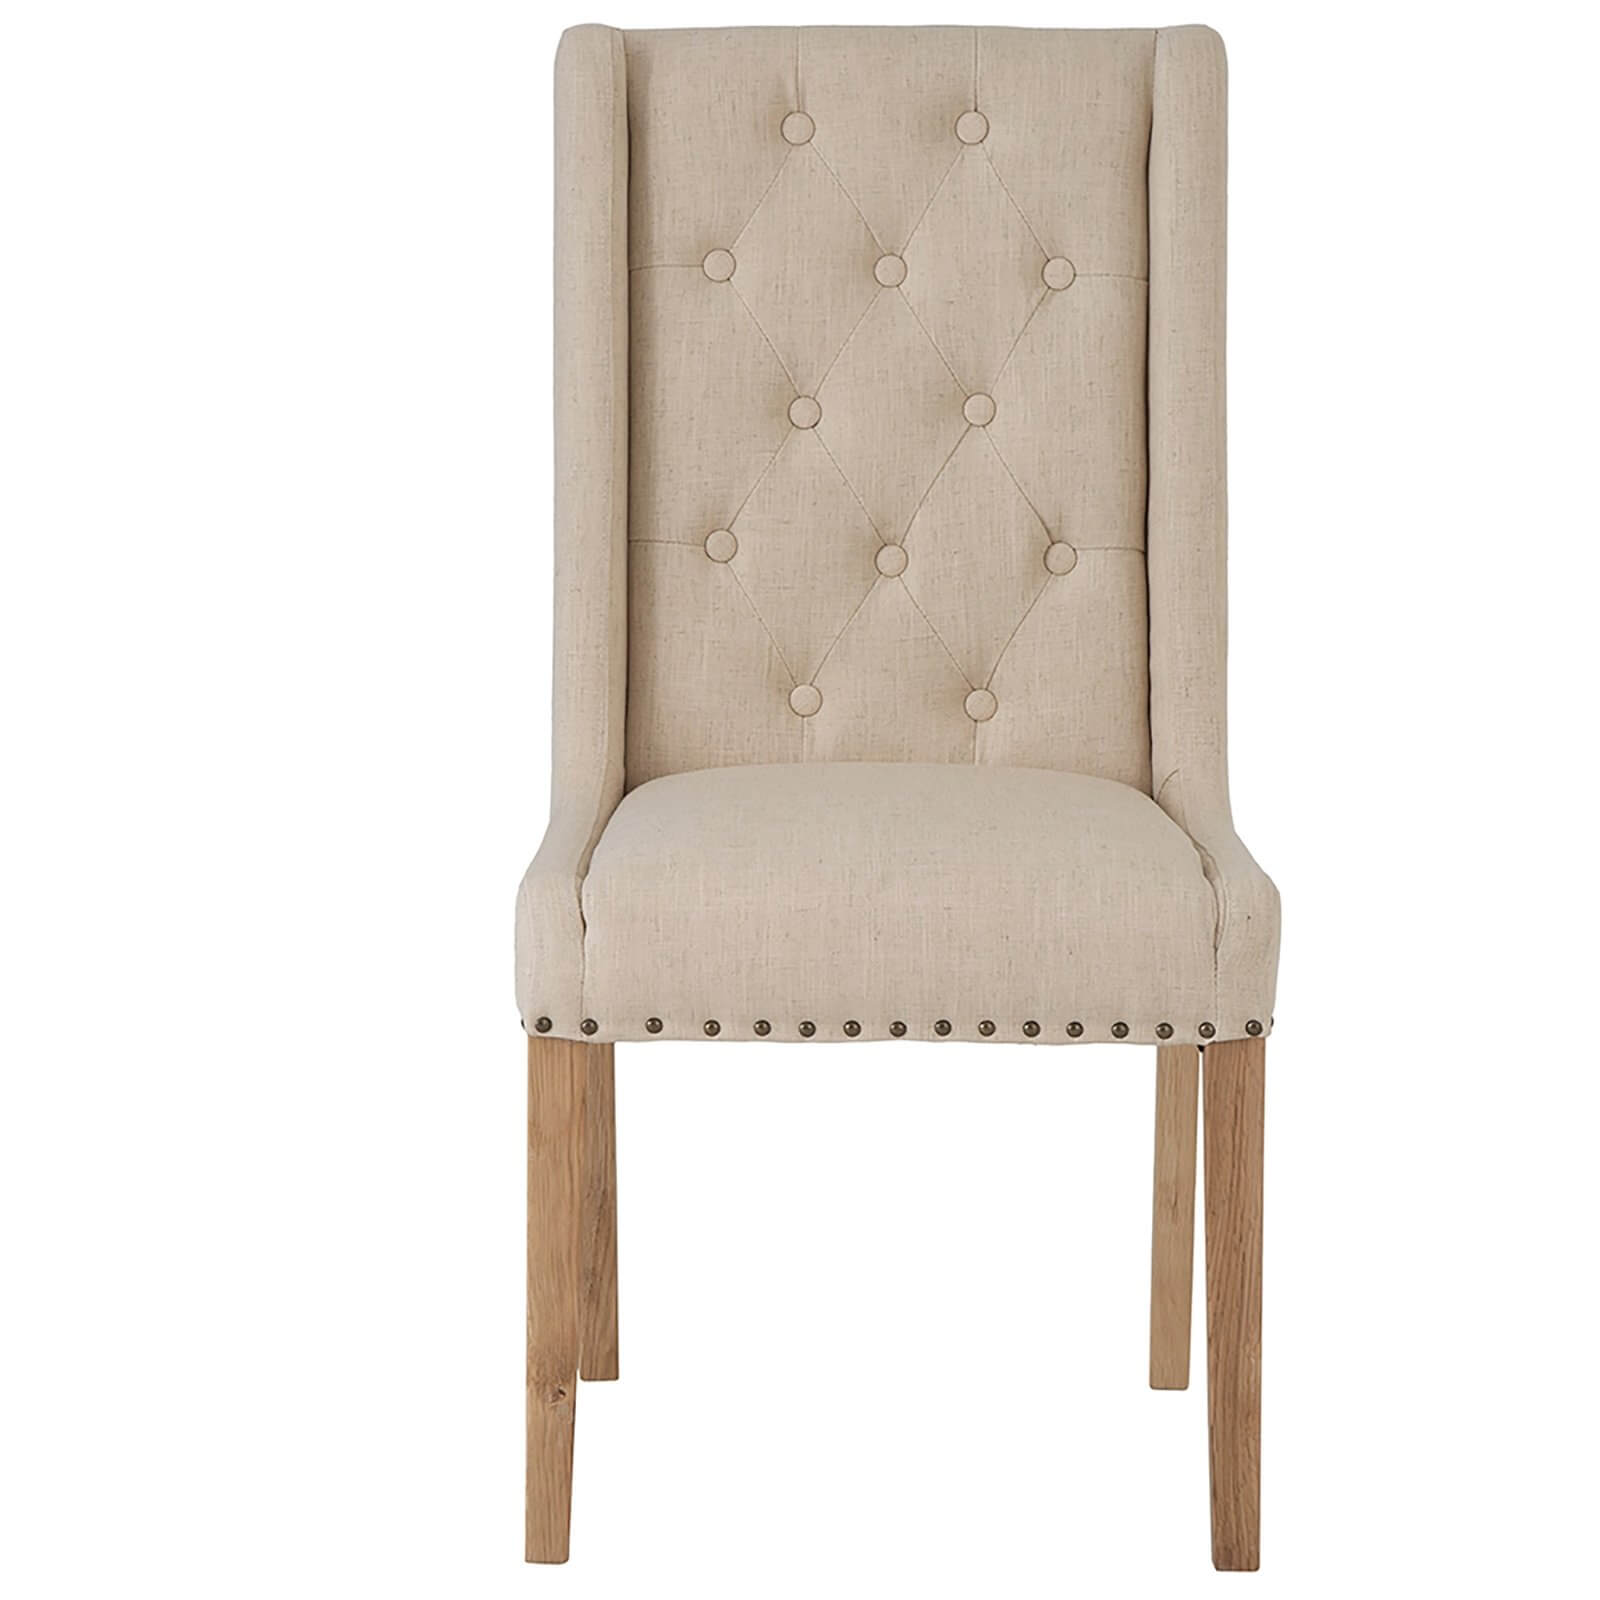 Button Back Dining Chair - Set of 2 - Beige